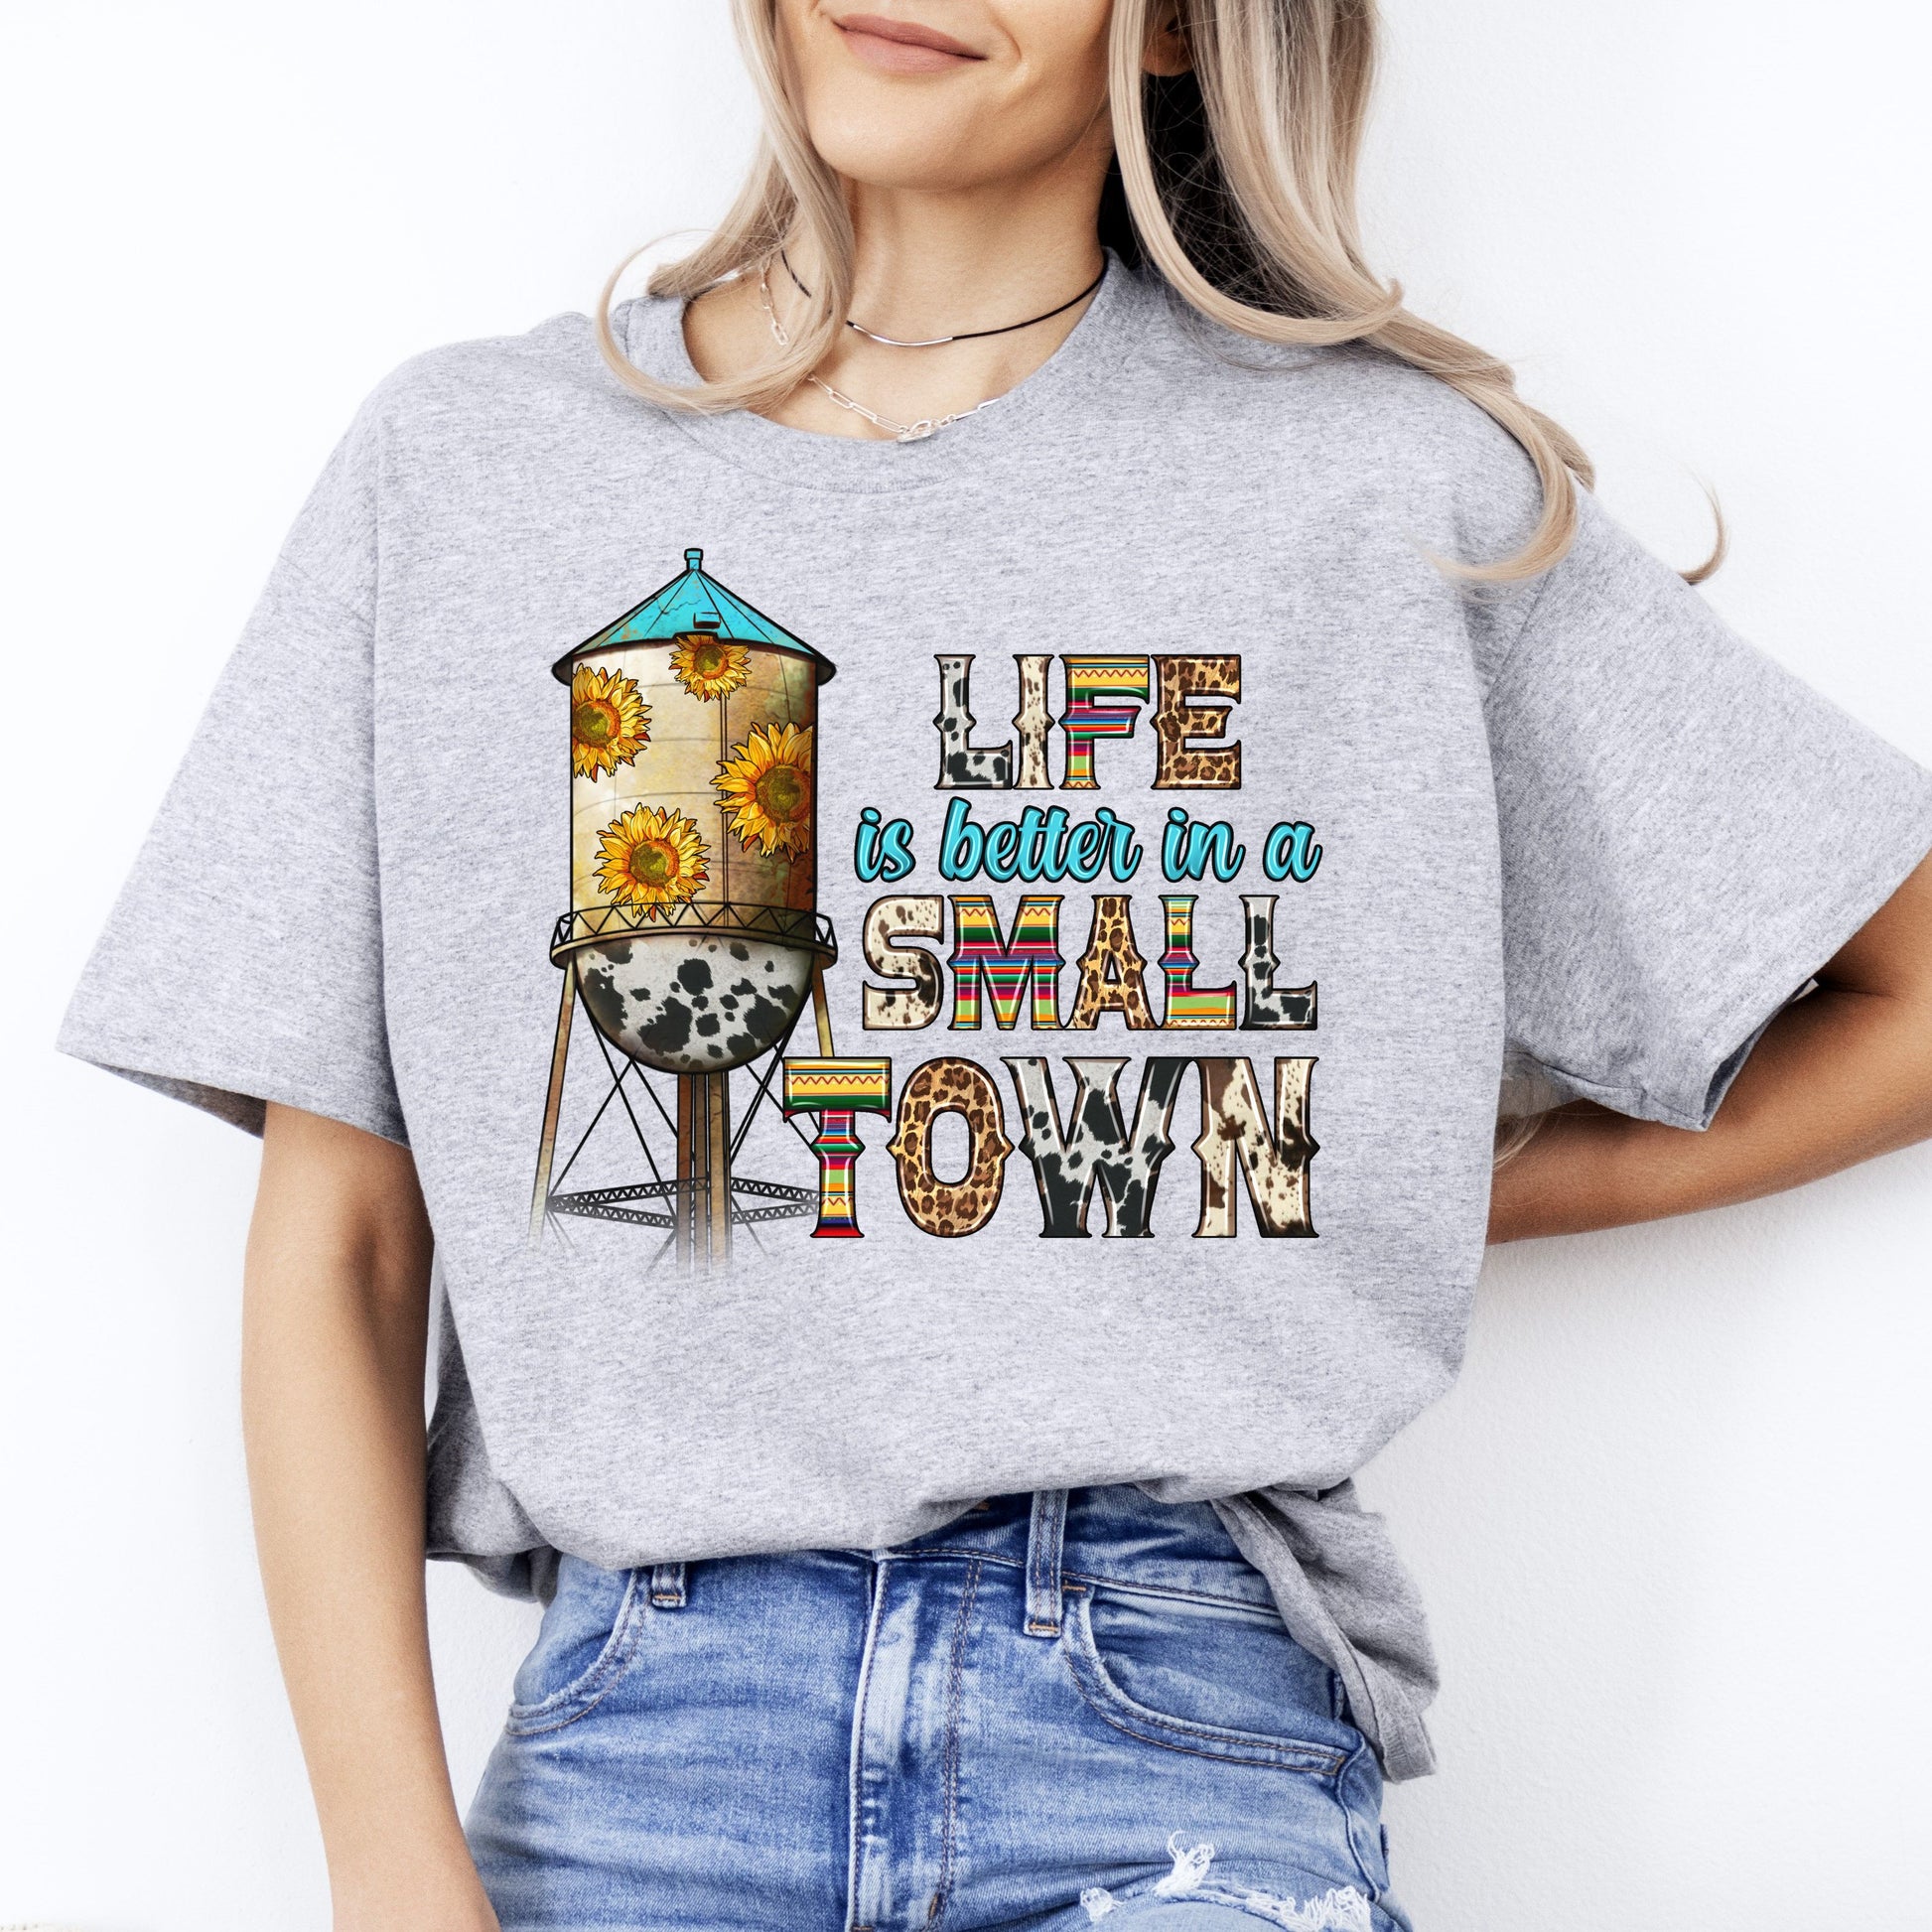 Life is better in a small town T-Shirt gift Western sunflowers small town girl Unisex Tee Sand White Sport Grey-Sport Grey-Family-Gift-Planet